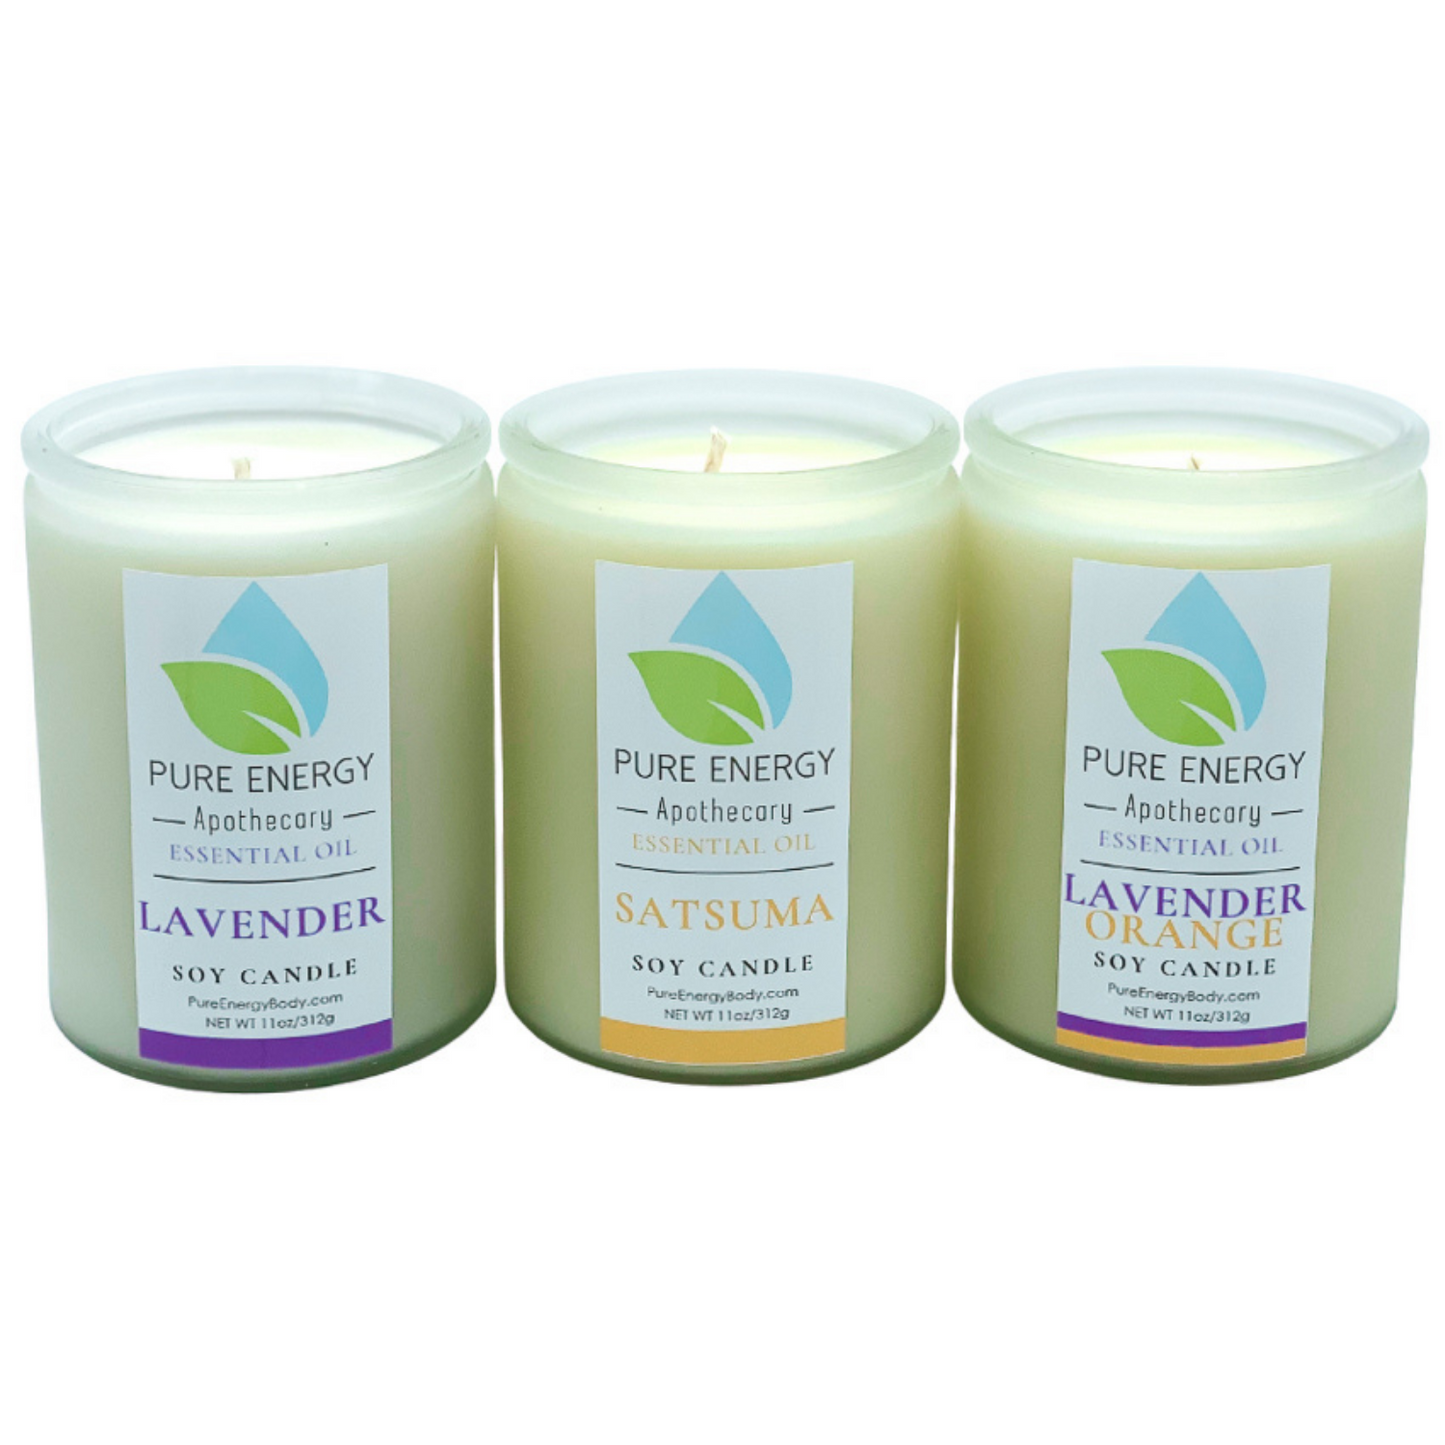 Soy Candle (Satsuma) by Pure Energy Apothecary